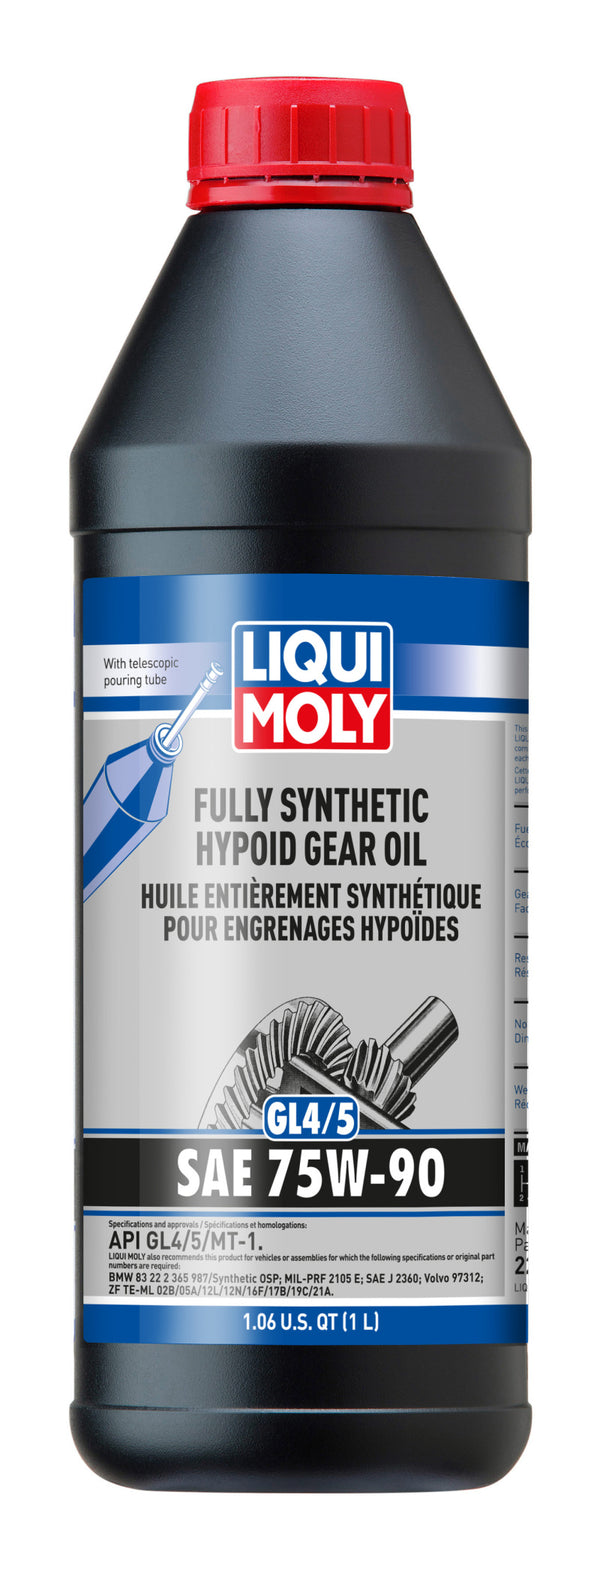 LIQUI MOLY 1L Fully Synthetic Hypoid Gear Oil (GL4/5) 75W90 - Case of 6